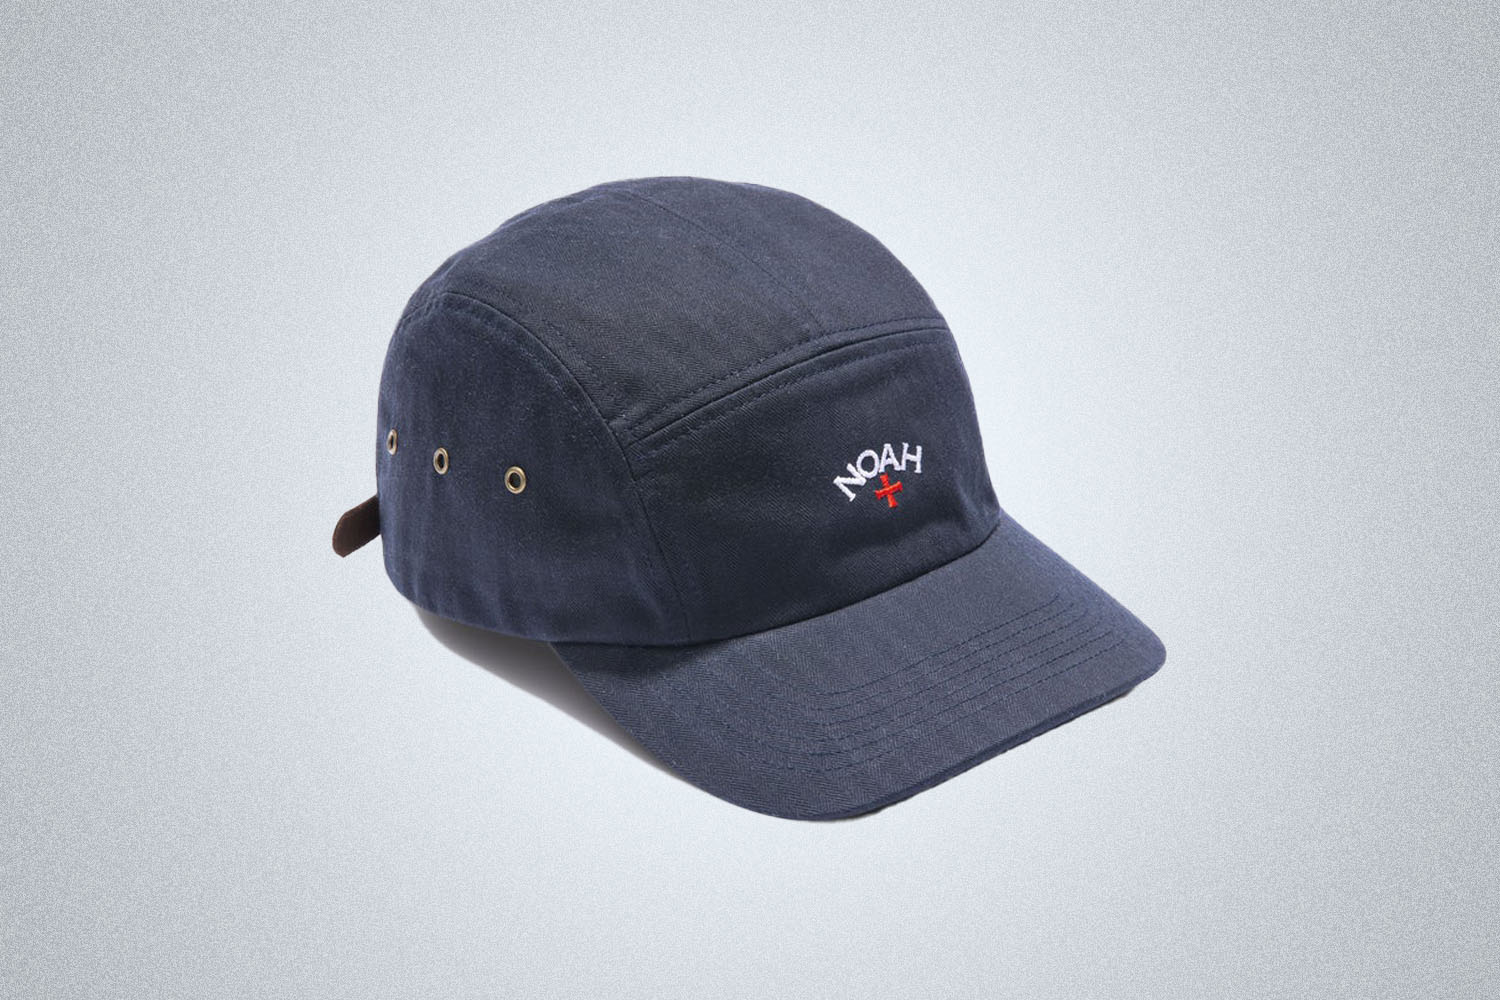 a navy hat with Noah logo